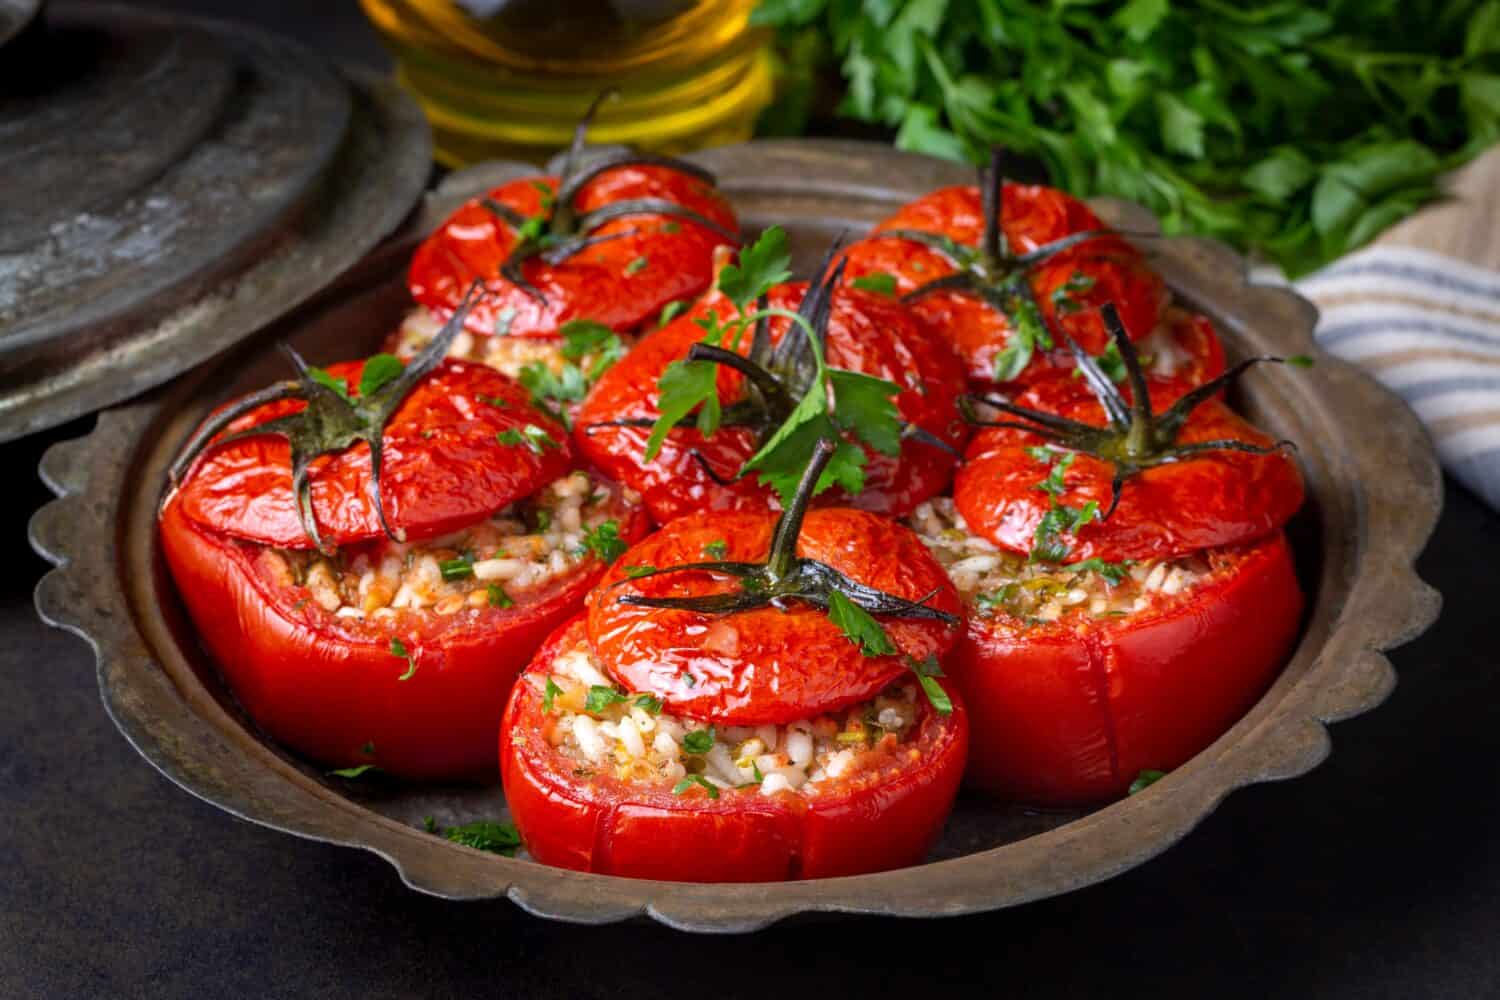 Traditional Turkish food; Stuffed tomatoes with olive oil stuffed with rice. Turkish name; domates dolmasi